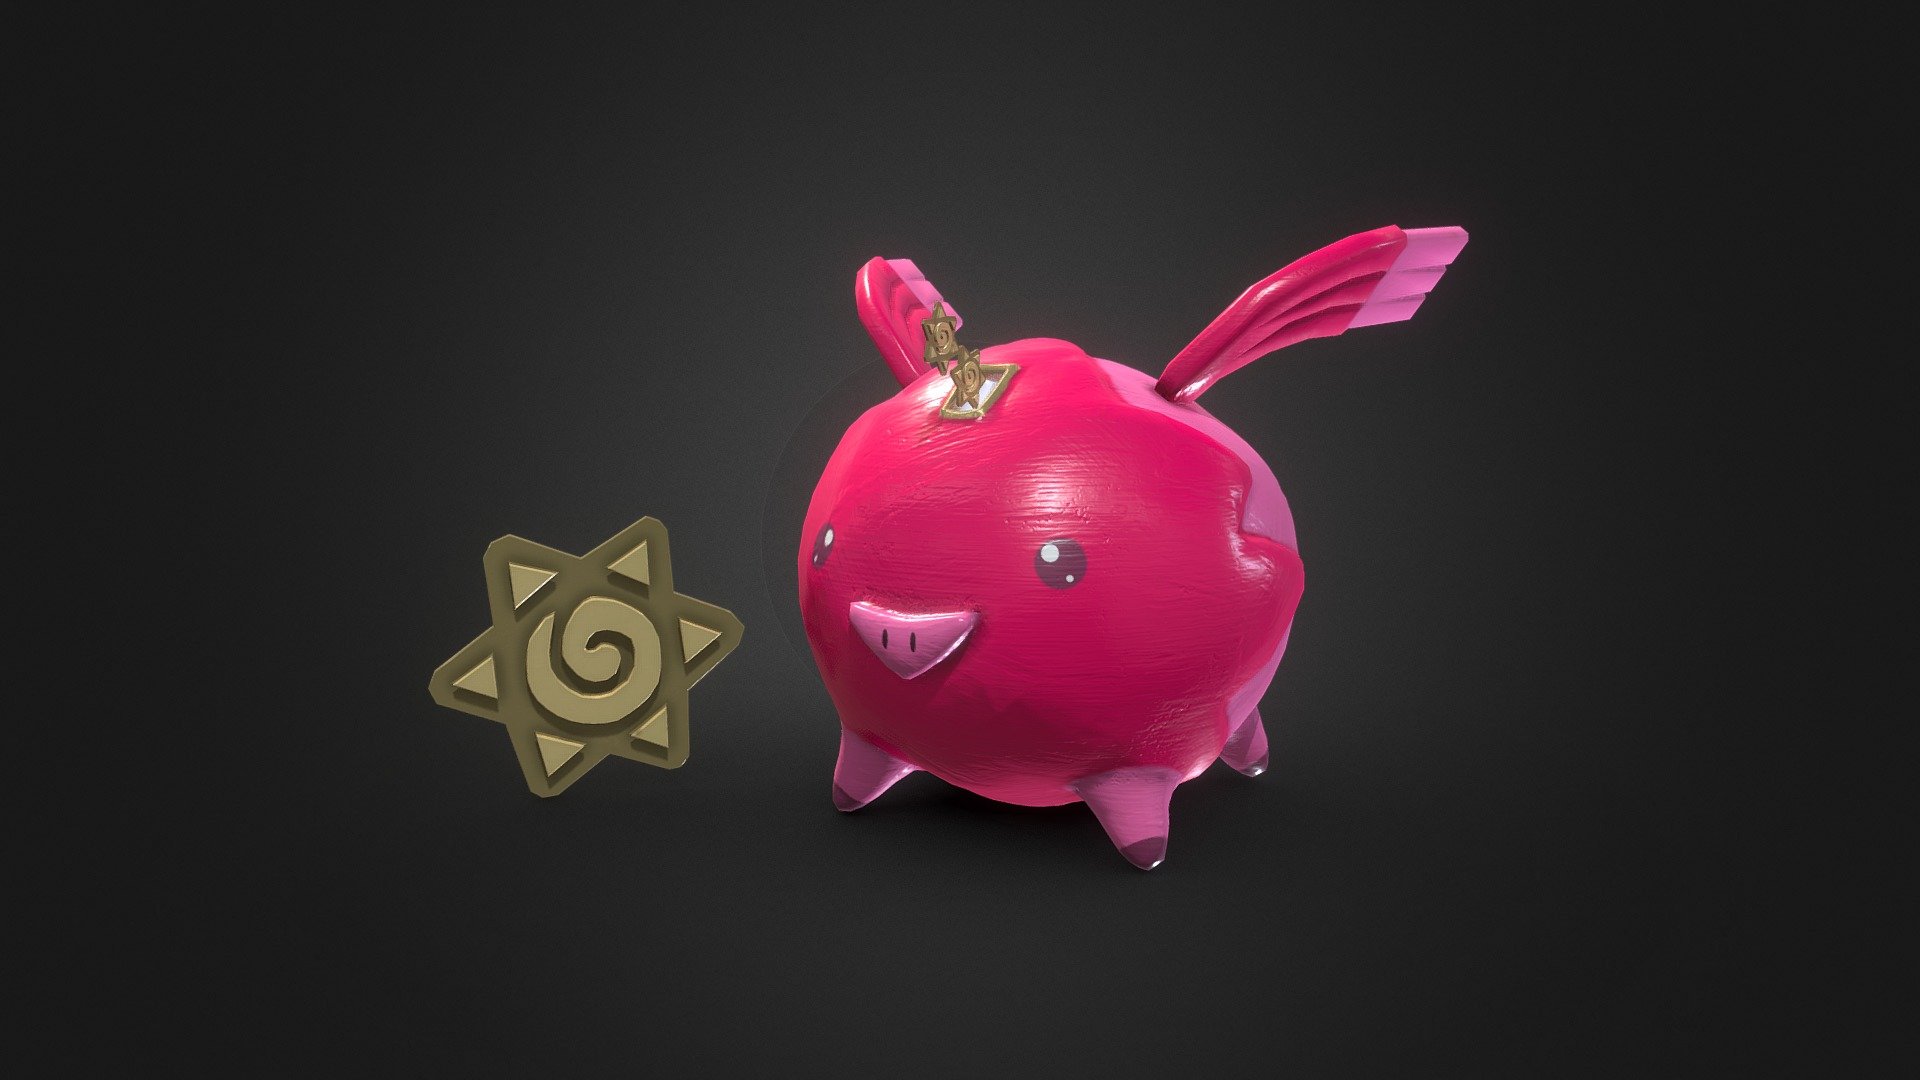 Here is the Pigepic piggy bank and Pansun coin from the video game: Temtem

It's game I'm spending a lot of time on right now

Modeled in Blender 2.81 and textured in Substance Painter - Pigepic piggy bank and Pansun - 3D model by SpartG 3d model